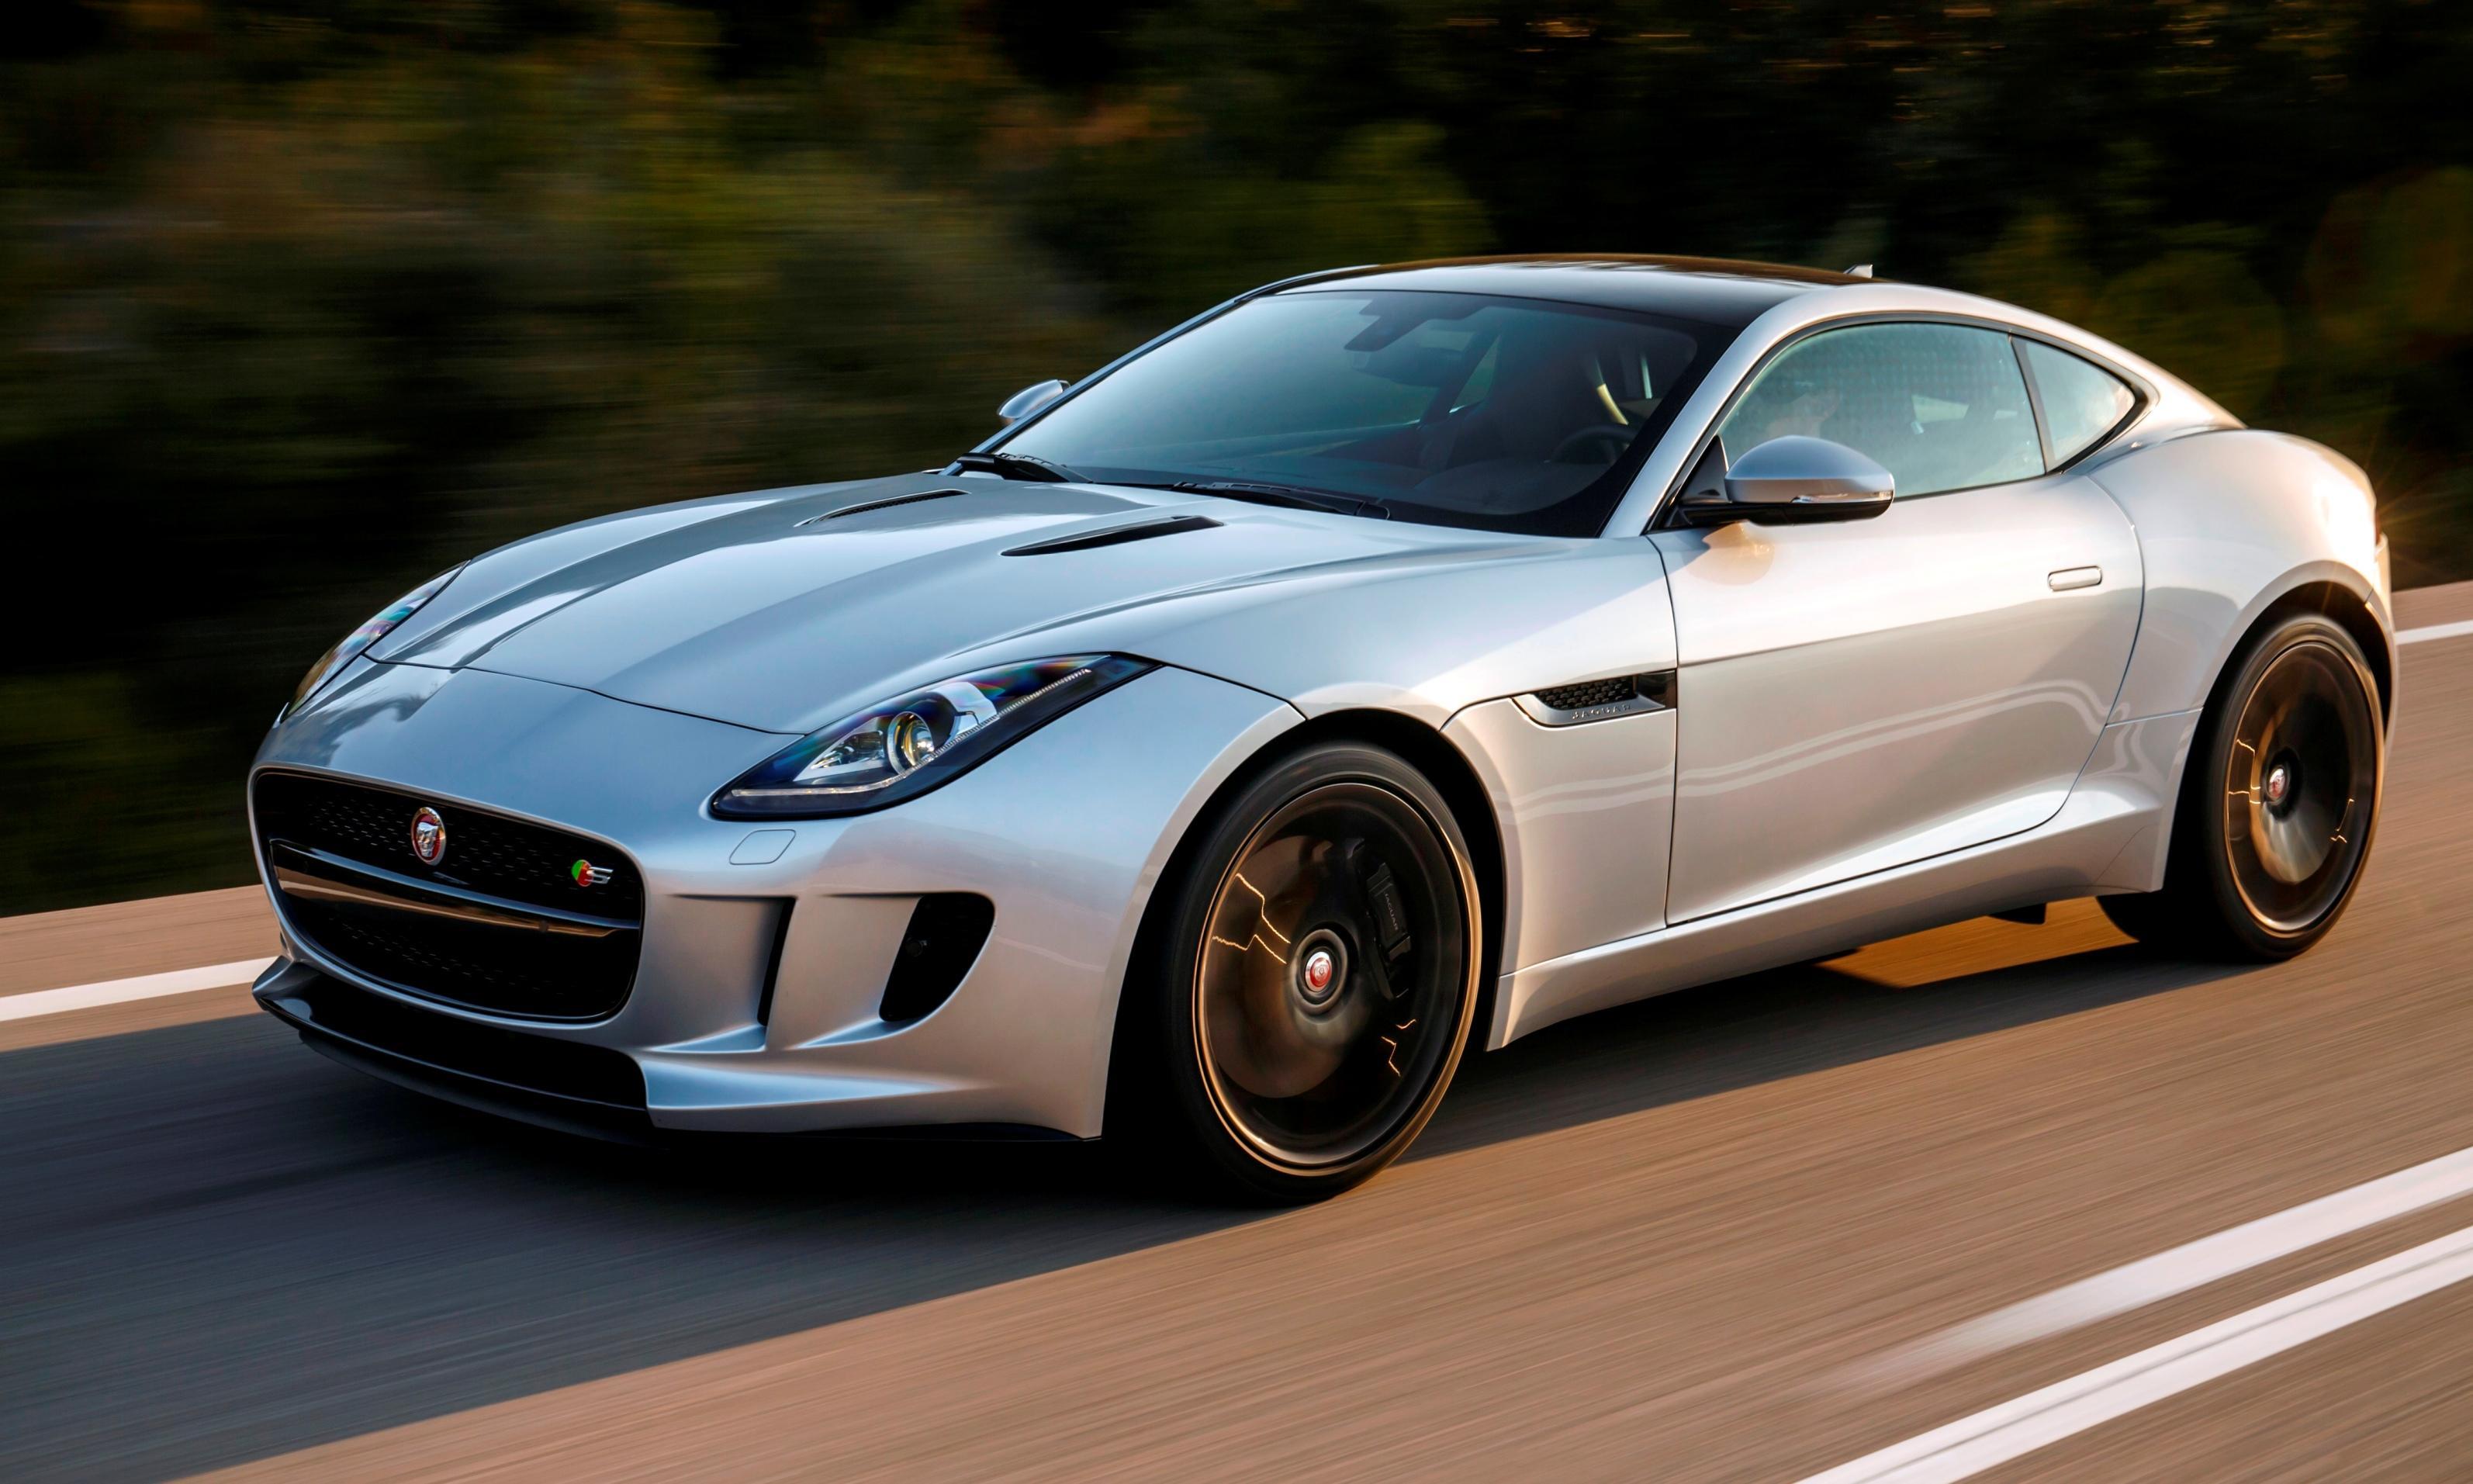 2015 JAGUAR F-Type Coupe - American Launch at Willow Springs